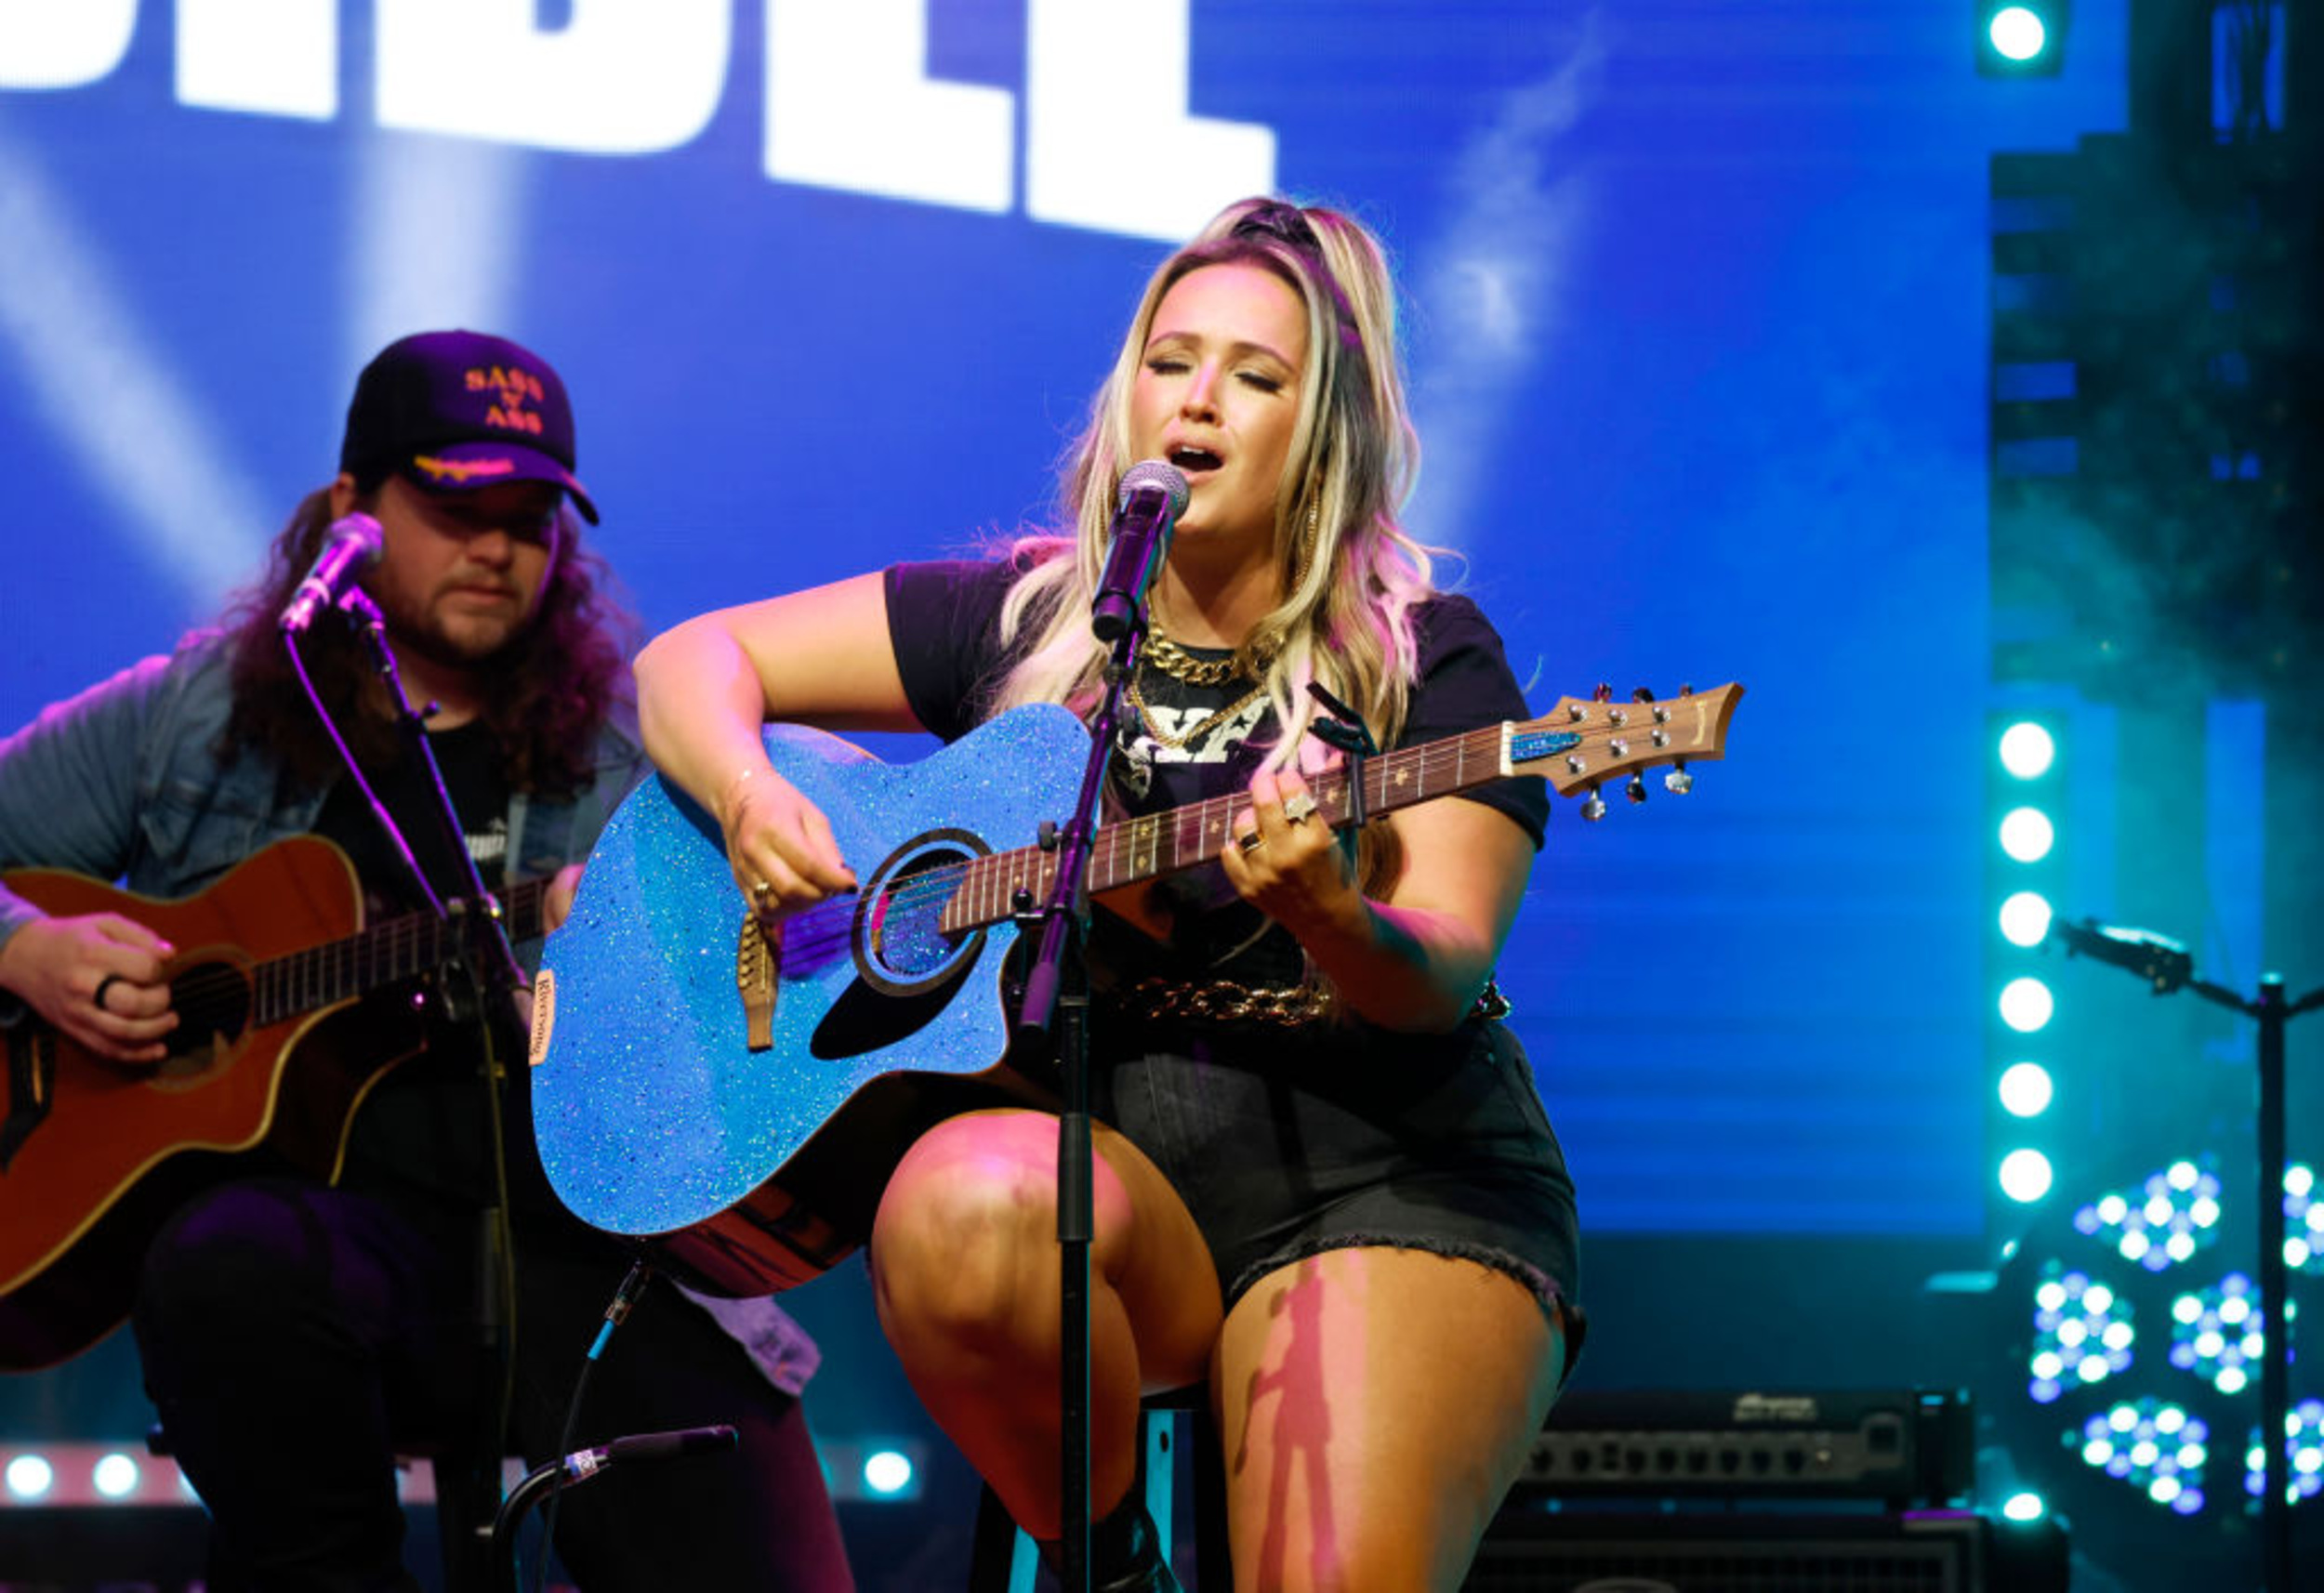 <p>She's already gone viral on TikTok and sold a ton of records, but for whatever reason, Priscilla Block isn't a household name just yet. That could all change in 2024, as she gears up for a really big year. She's headed out on a major North American tour in support of her song "Hey Jack," and fans are definitely going to fall in love with her hard-partying live show. </p><p>You may also like: <a href='https://www.yardbarker.com/entertainment/articles/the_20_best_movie_prequels_022924/s1__35322728'>The 20 best movie prequels</a></p>